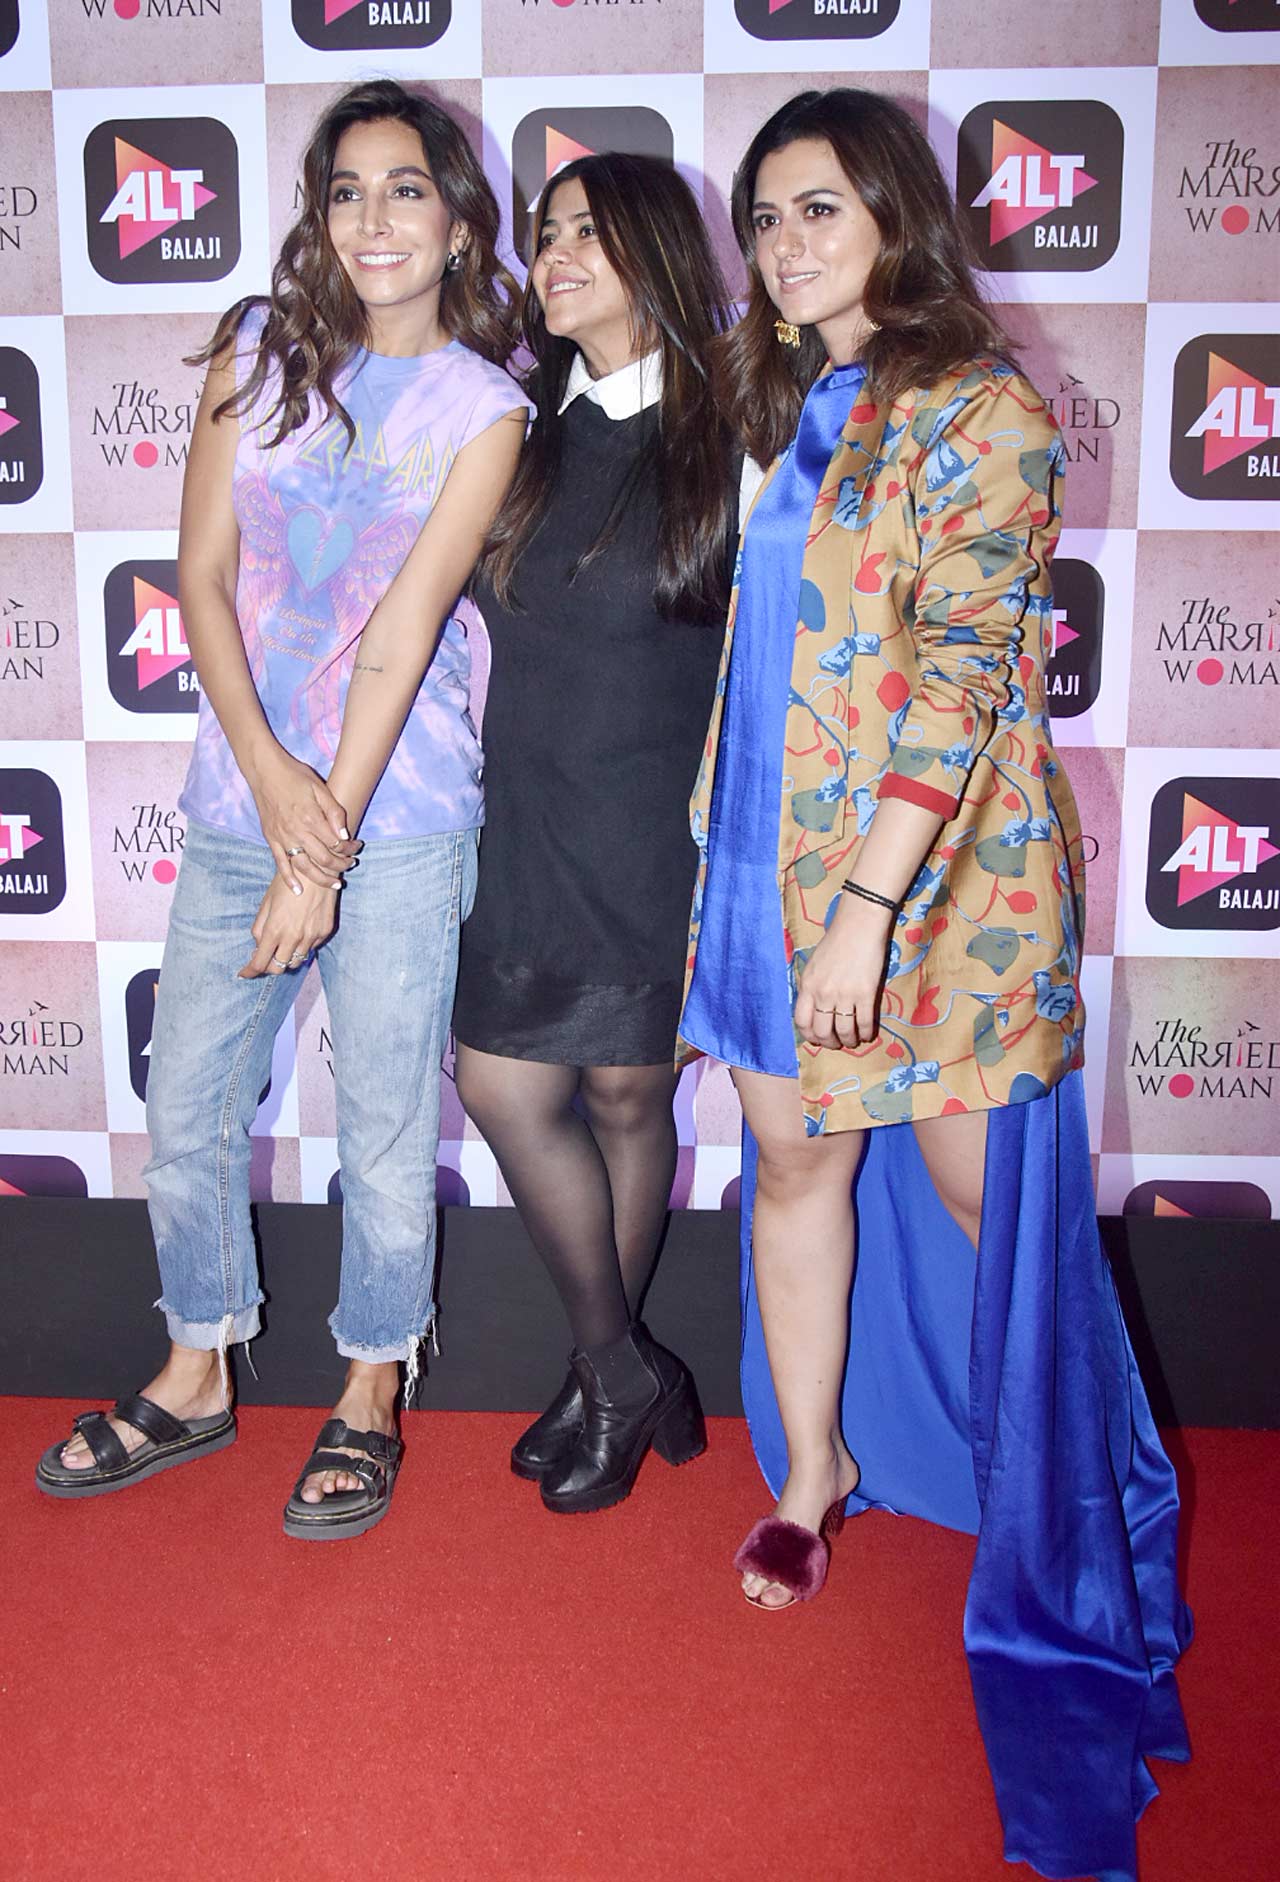 The makers of The Married Woman hosted a special screening for the entire cast of the digital show. For the uninitiated, producer Ekta Kapoor, who is all set to release new web series, says she waited to make the intense drama show on a digital platform because it wouldn't be possible to do justice to its content on television or film. All pictures/Yogen Shah
In picture: Ekta Kapoor posed with the cast of the show - Monica Dogra and Ridhi Dogra.